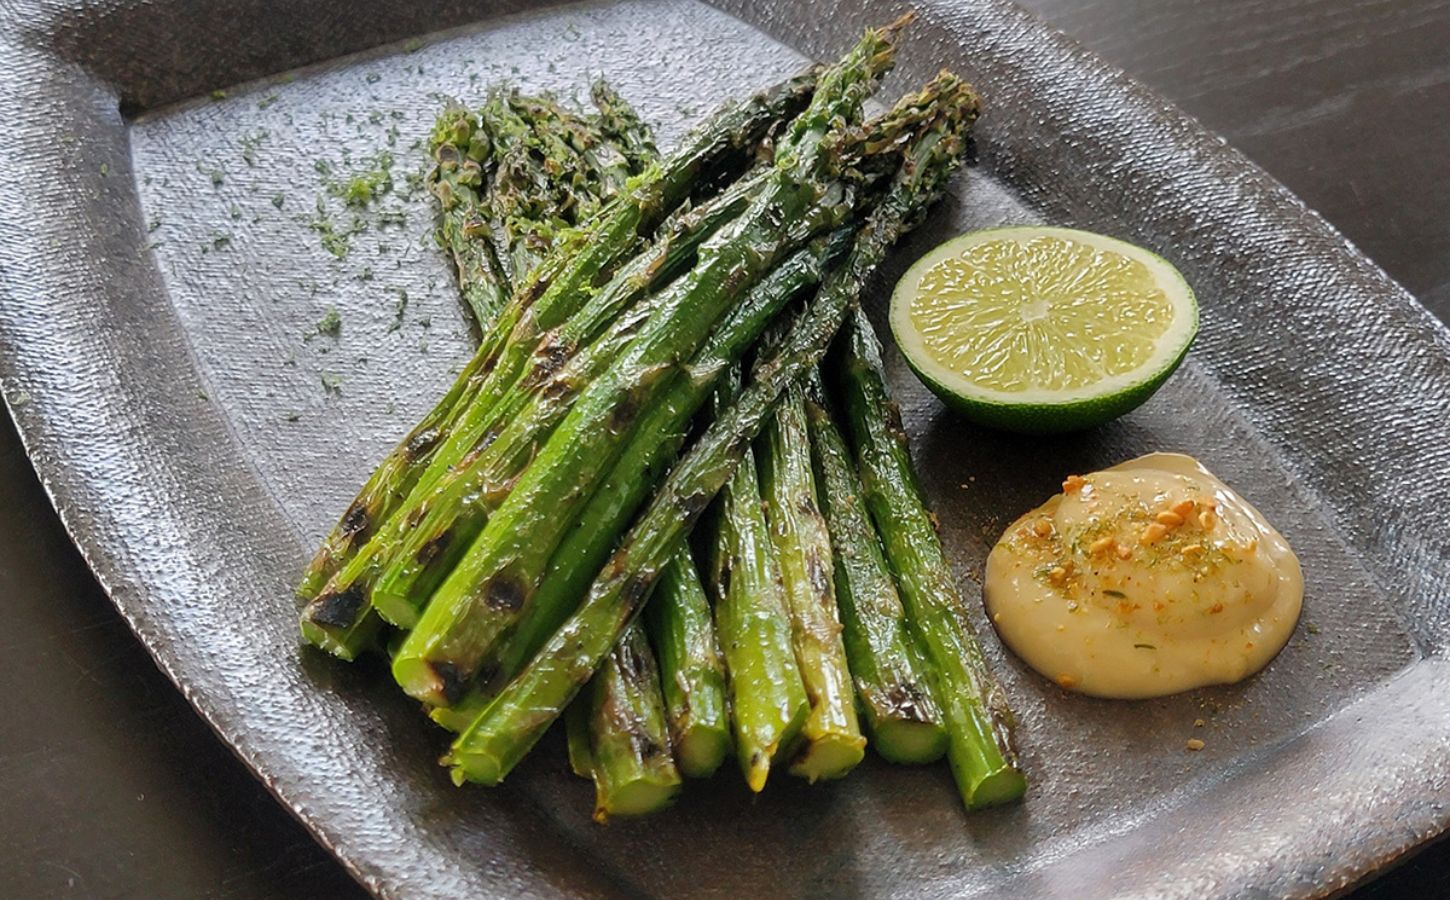 Grilled asparagus next to a portion of vegan lime miso mayo and a cut lime